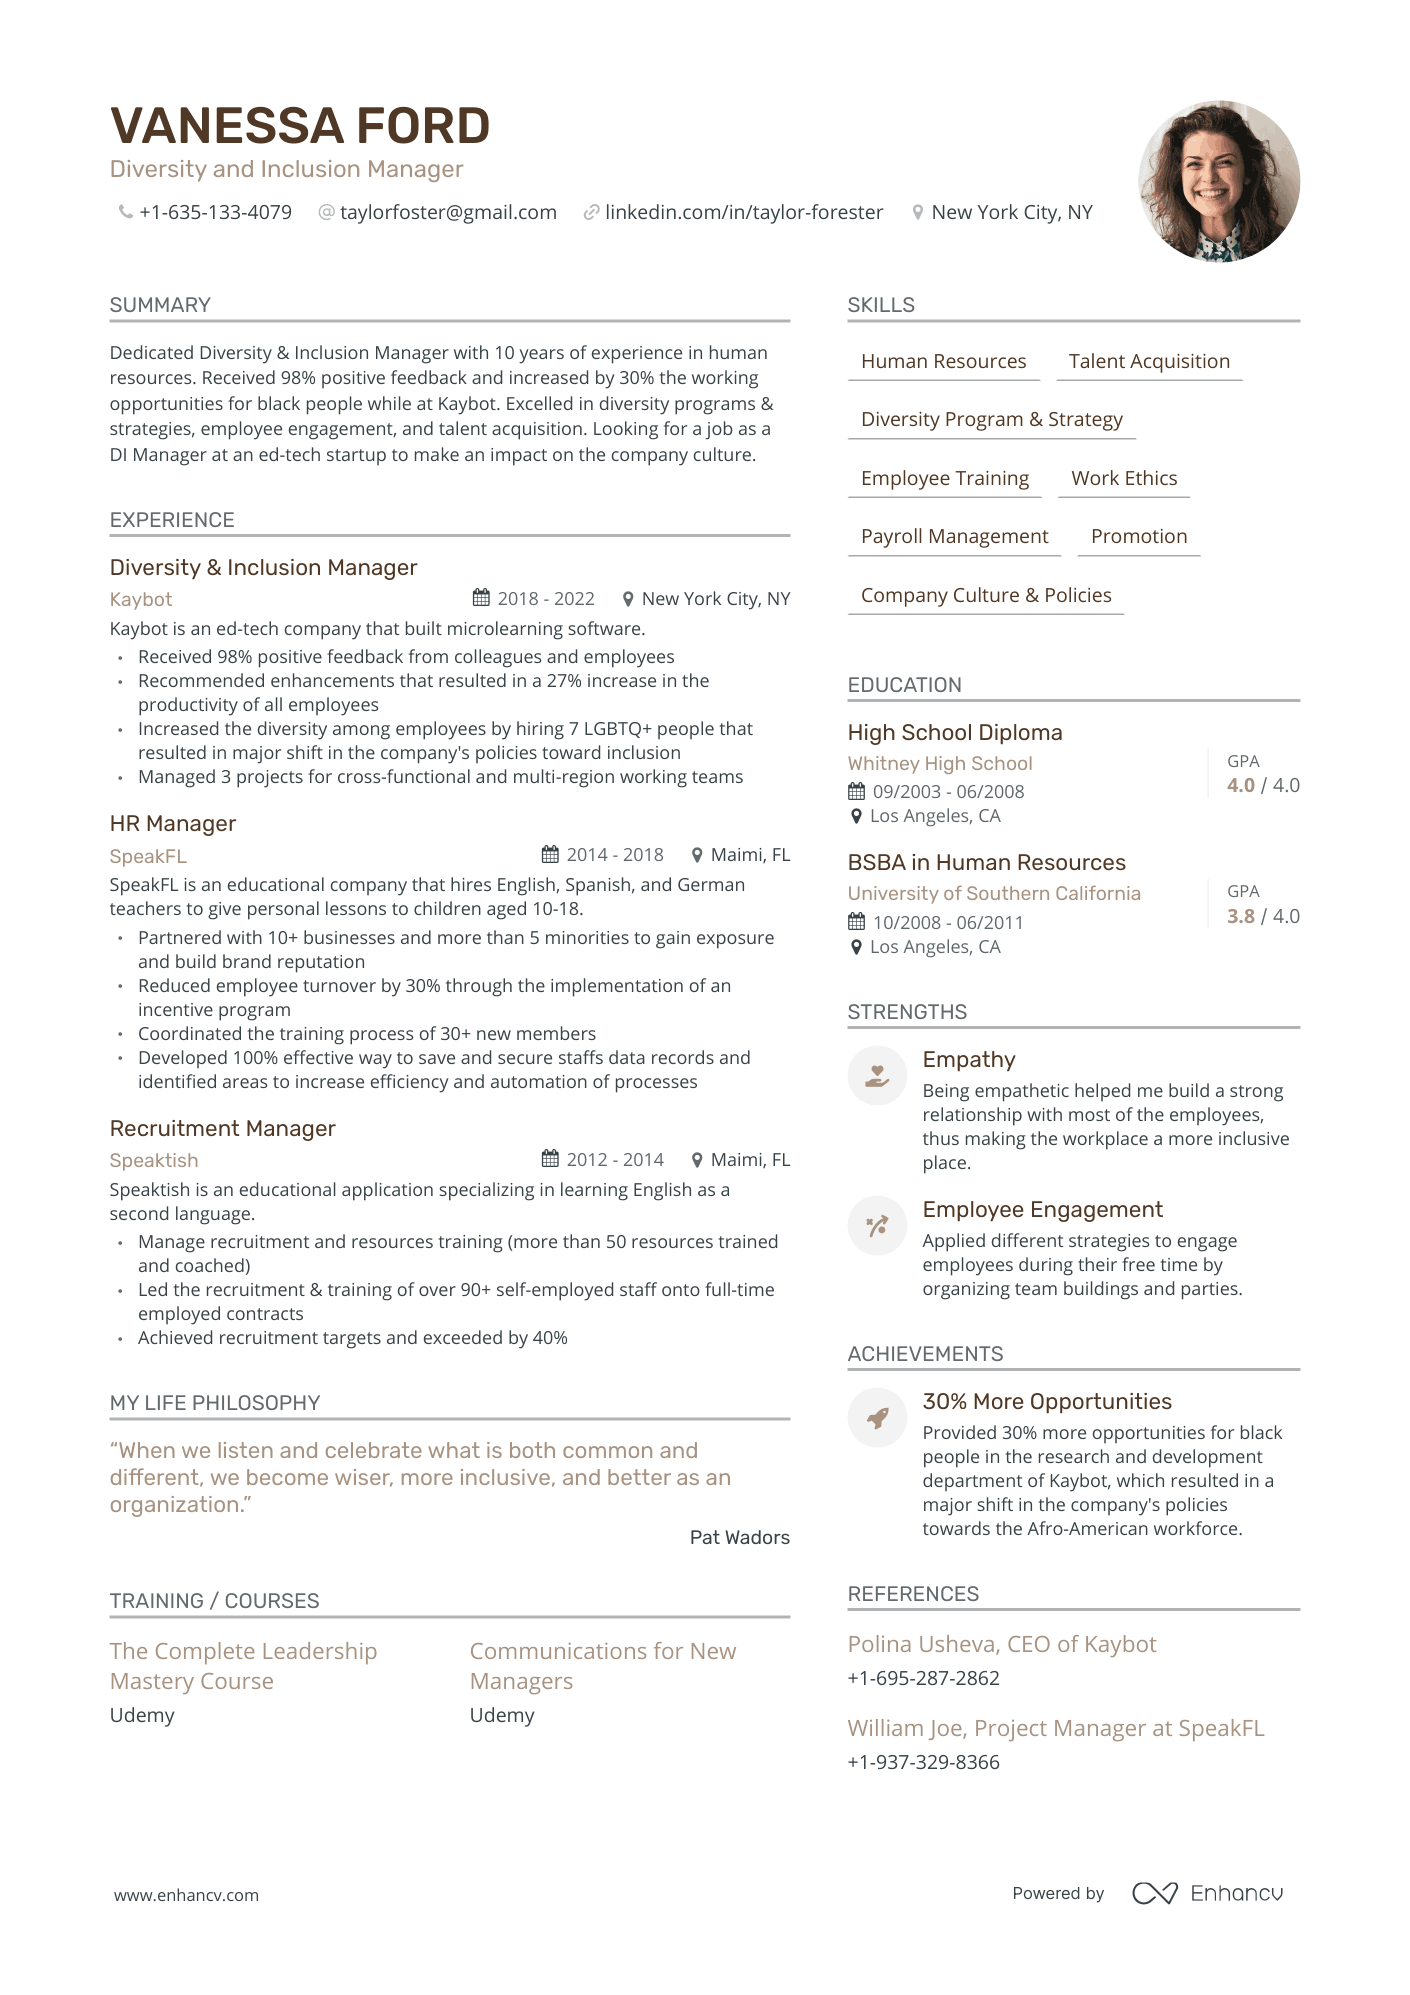 Modern Diversity & Inclusion Manager Resume Template